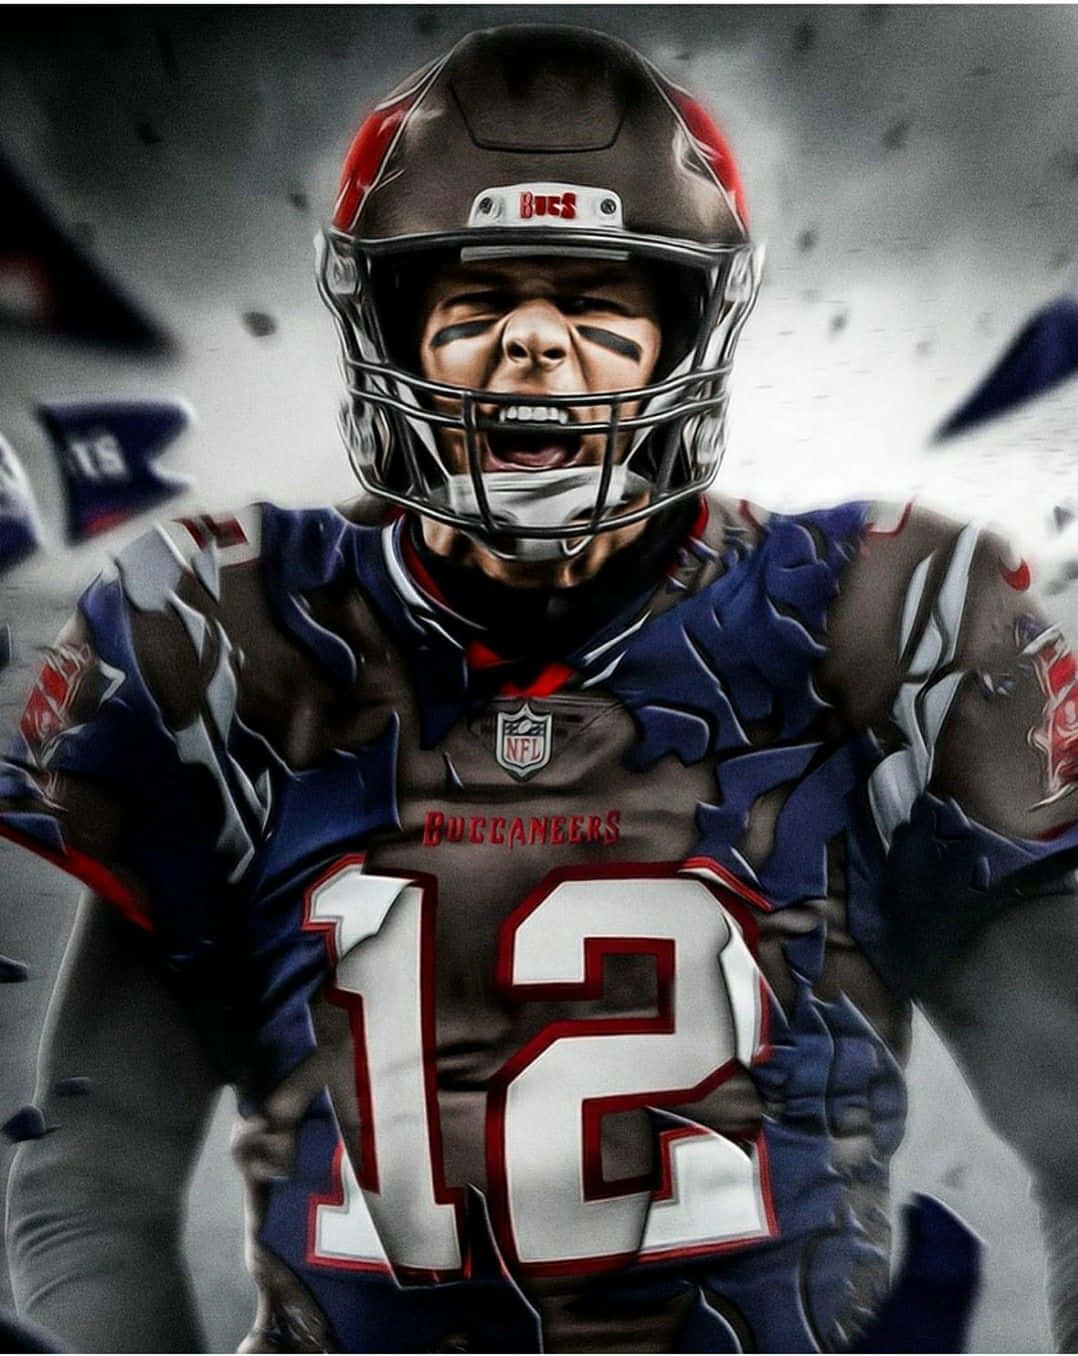 A Football Player In A Uniform With A Helmet Wallpaper